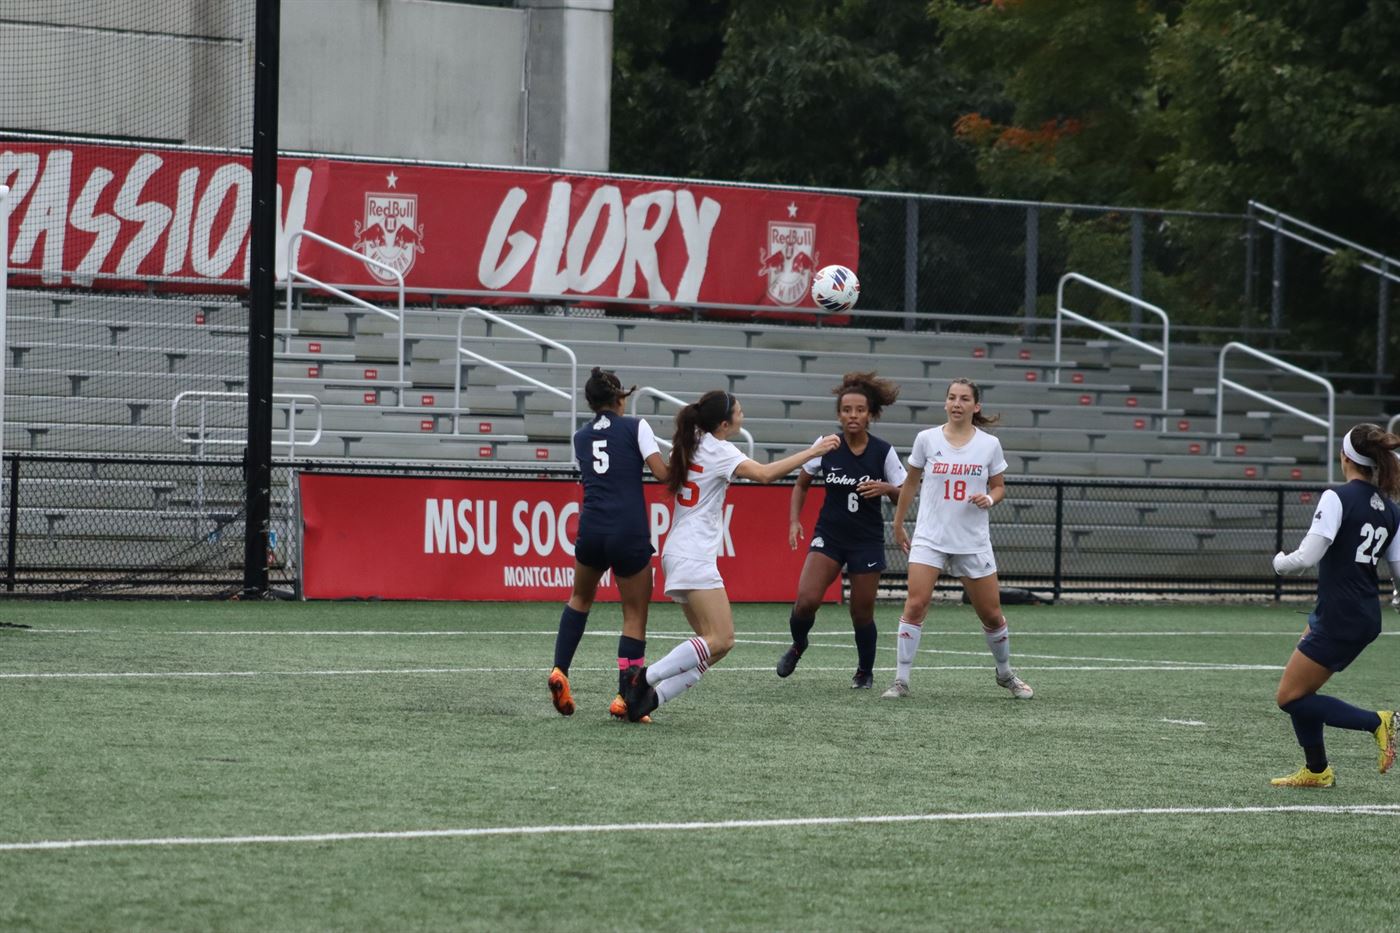 Prendergast was happy to accomplish a hat trick with Cahill, who she sees as a role model. Trevor Giesberg | The Montclarion